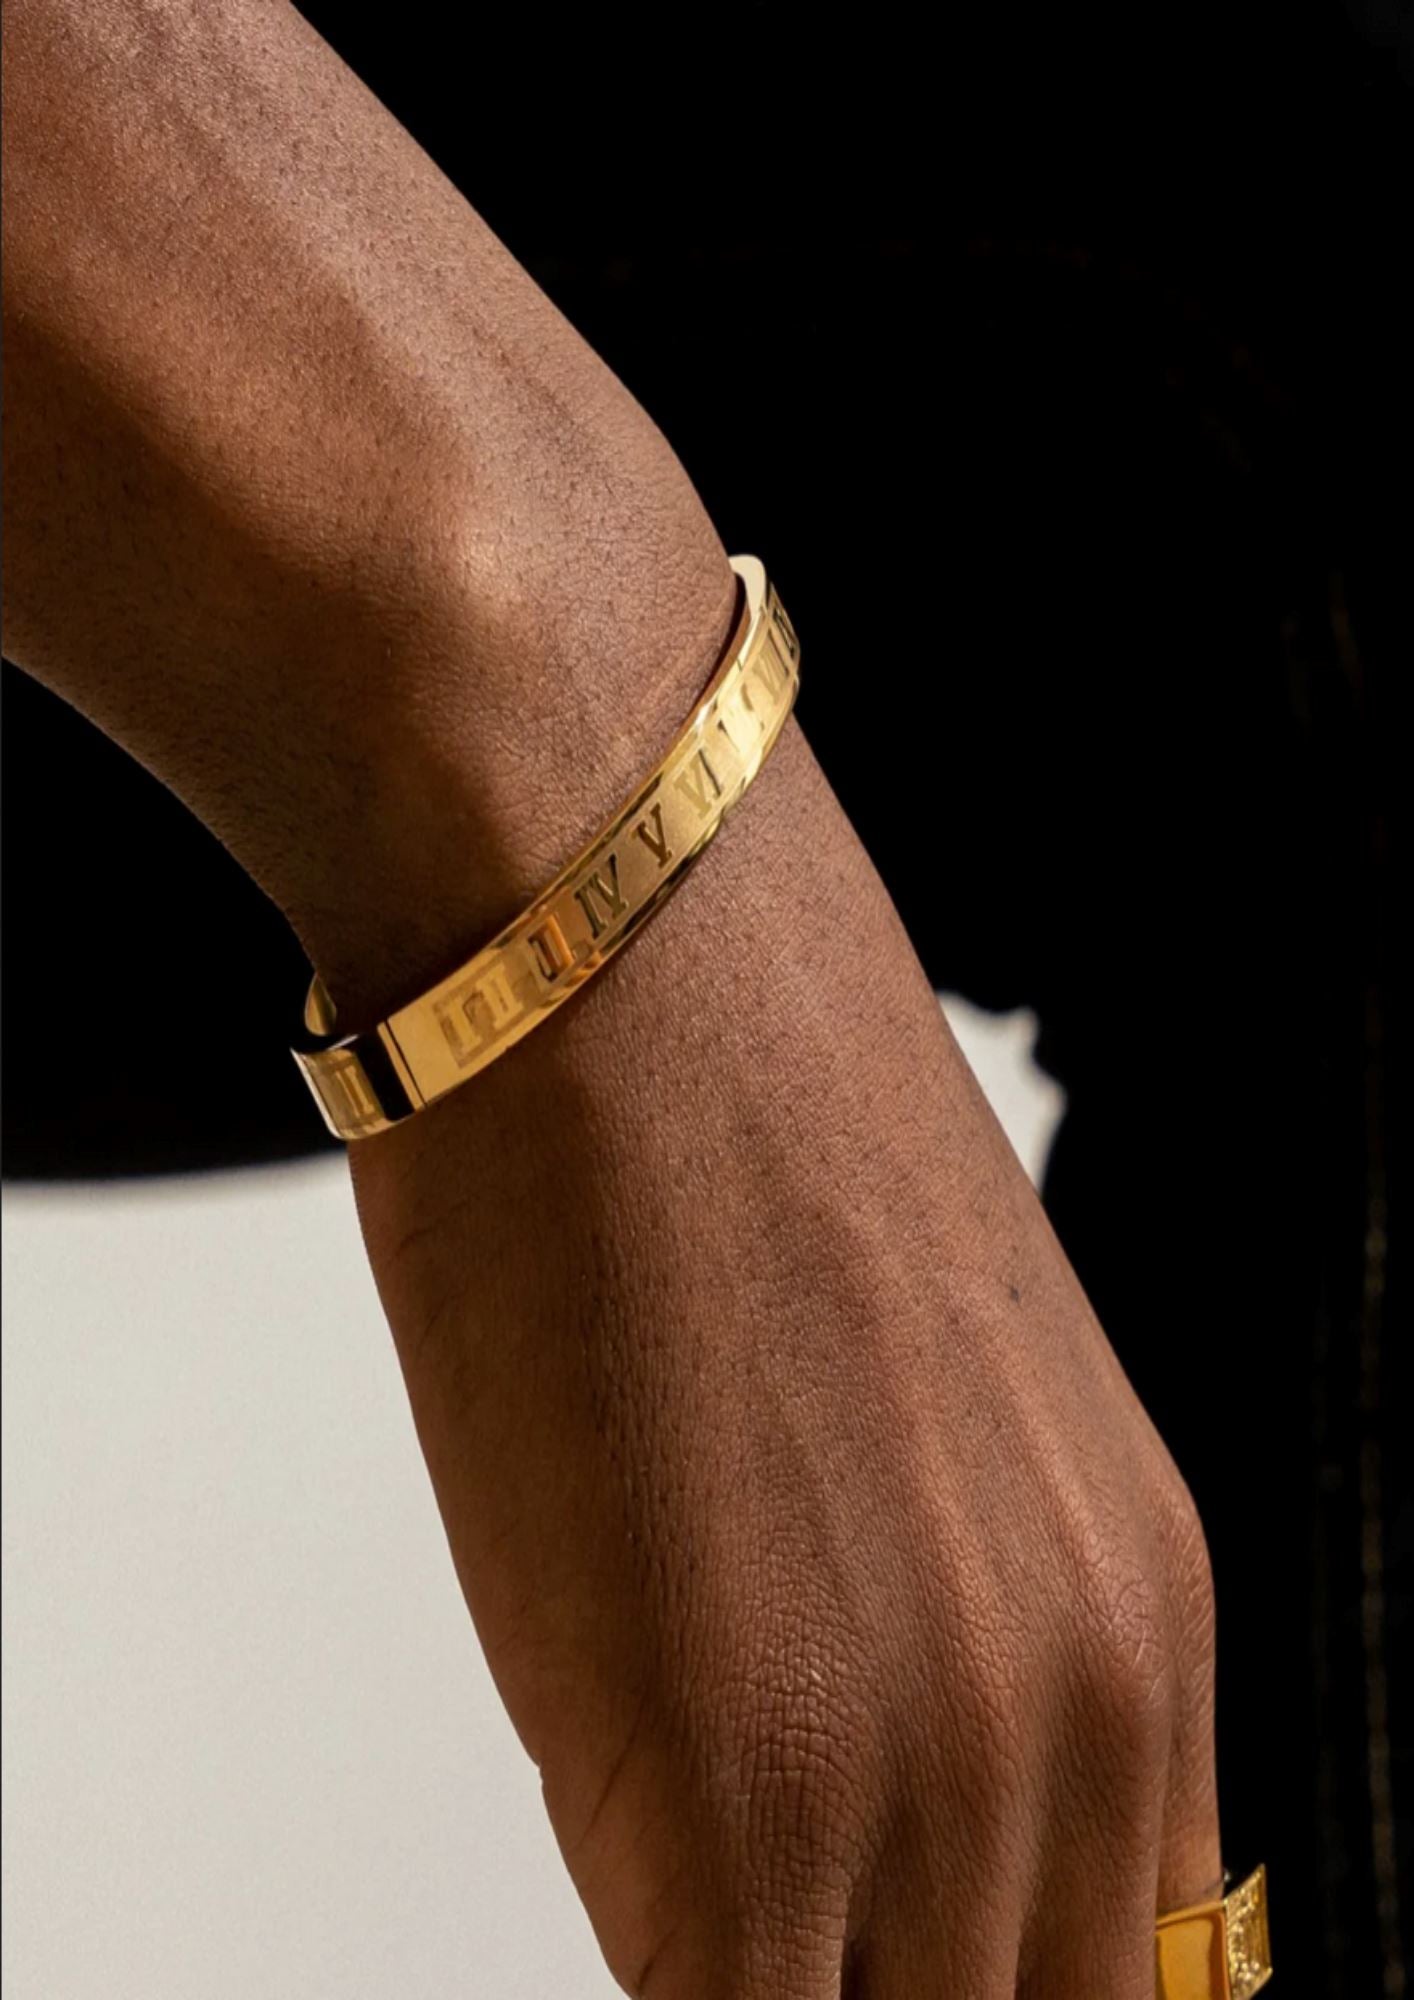 ROMAN NUMERAL BRACELET - GOLD ring Yubama Jewelry Online Store - The Elegant Designs of Gold and Silver ! 